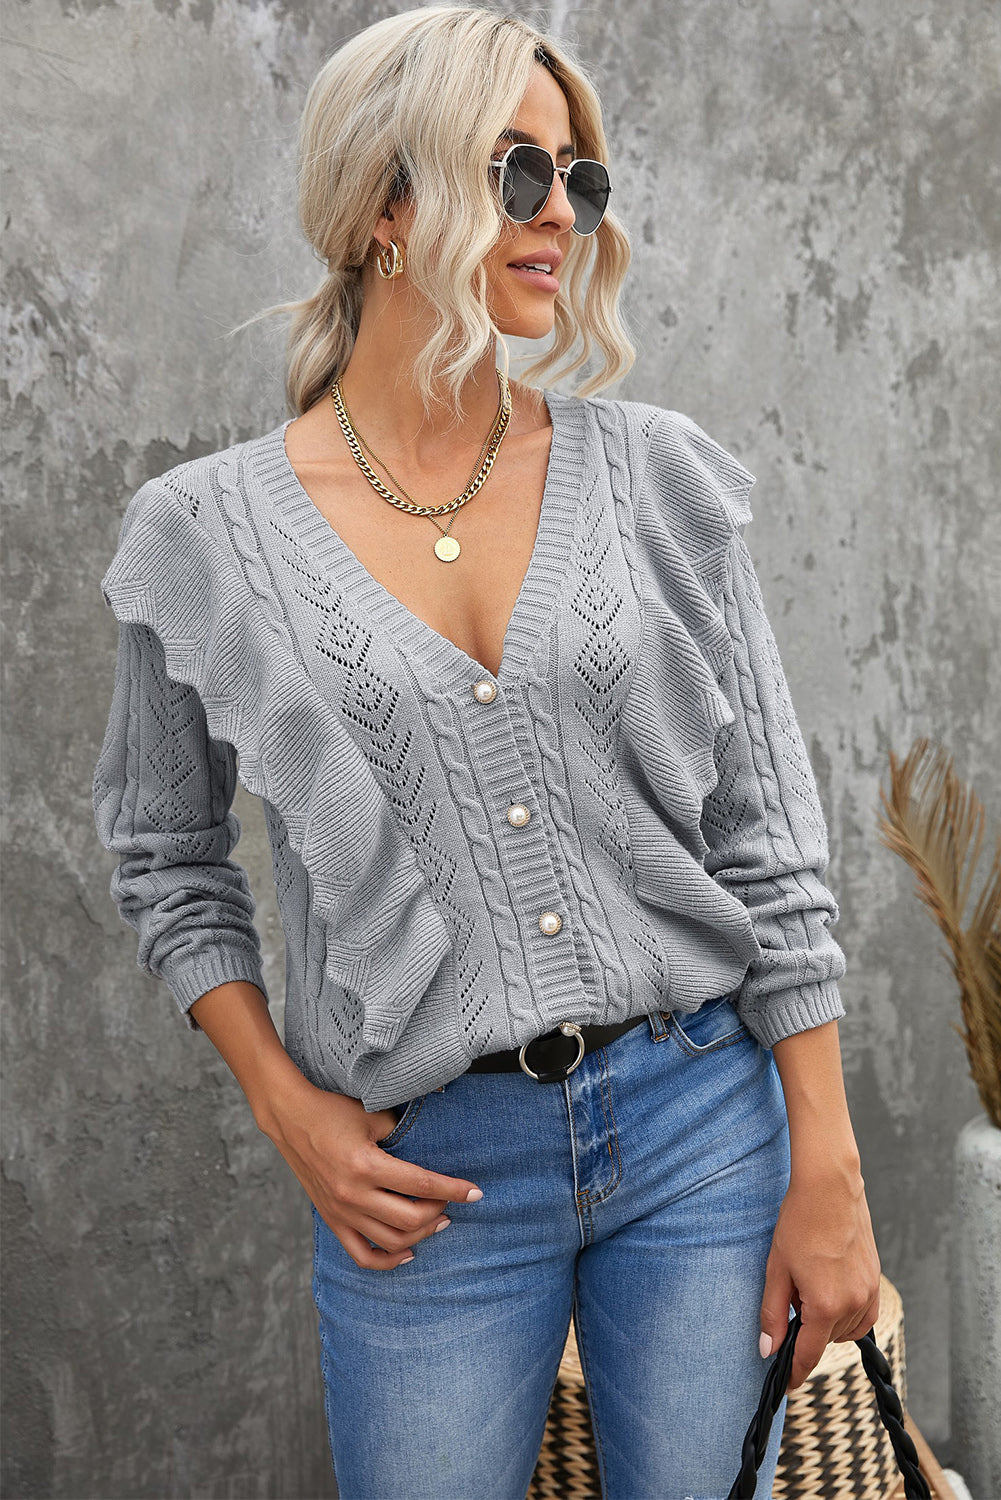 Chic Gray Ruffled Buttoned Open Front V Neck Knitted Sweater, Shop for cheap Chic Gray Ruffled Buttoned Open Front V Neck Knitted Sweater